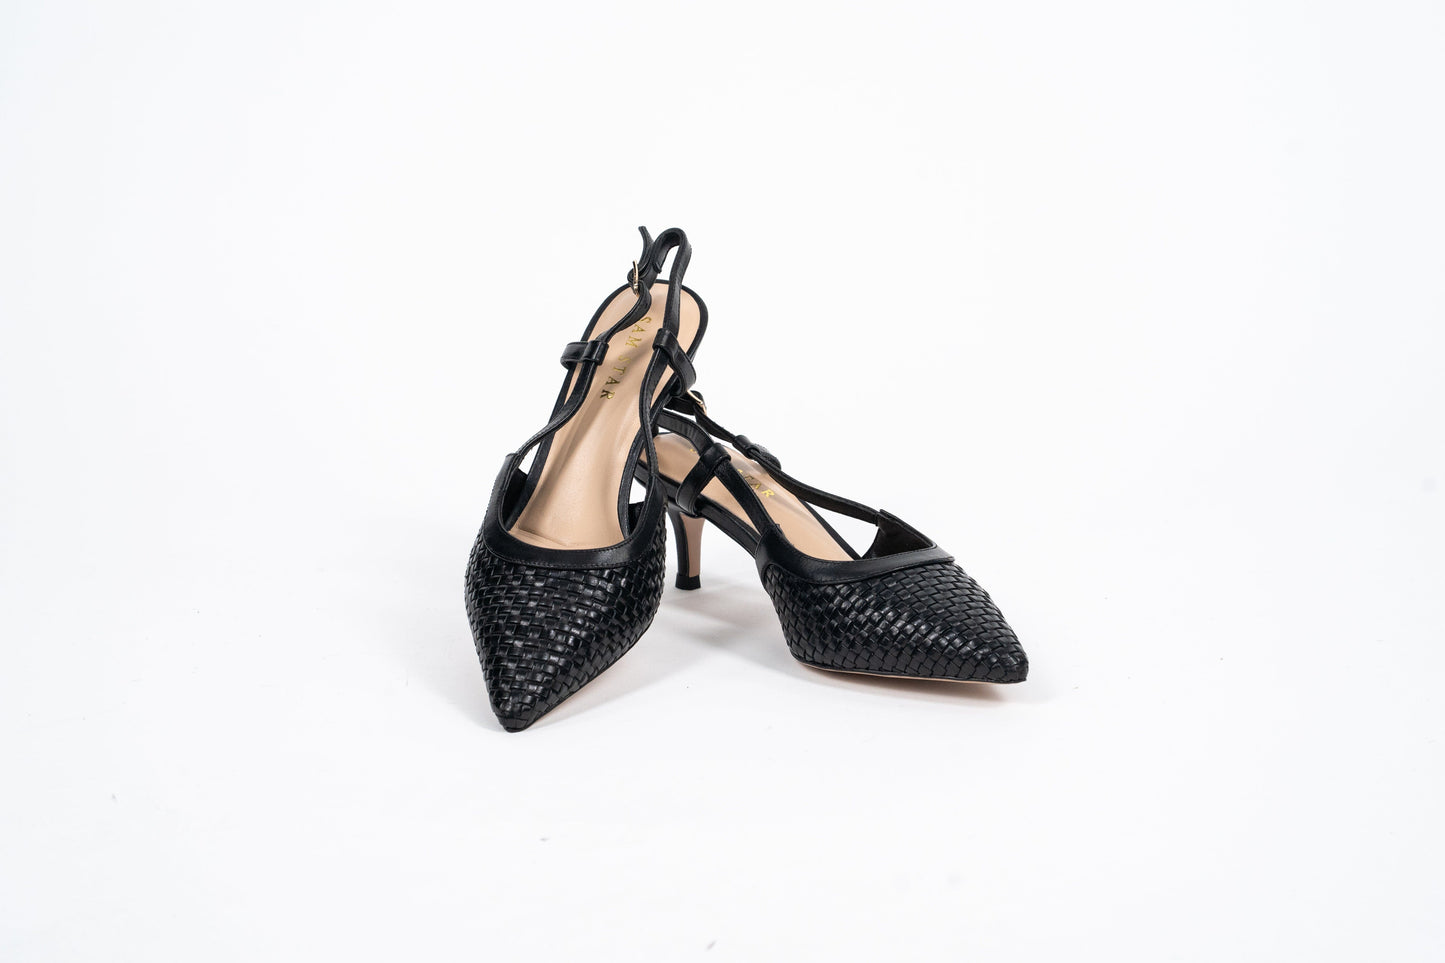 SS23010 Leather woven court shoes - Black (New Arrival) ladies shoes Sam Star shoes 